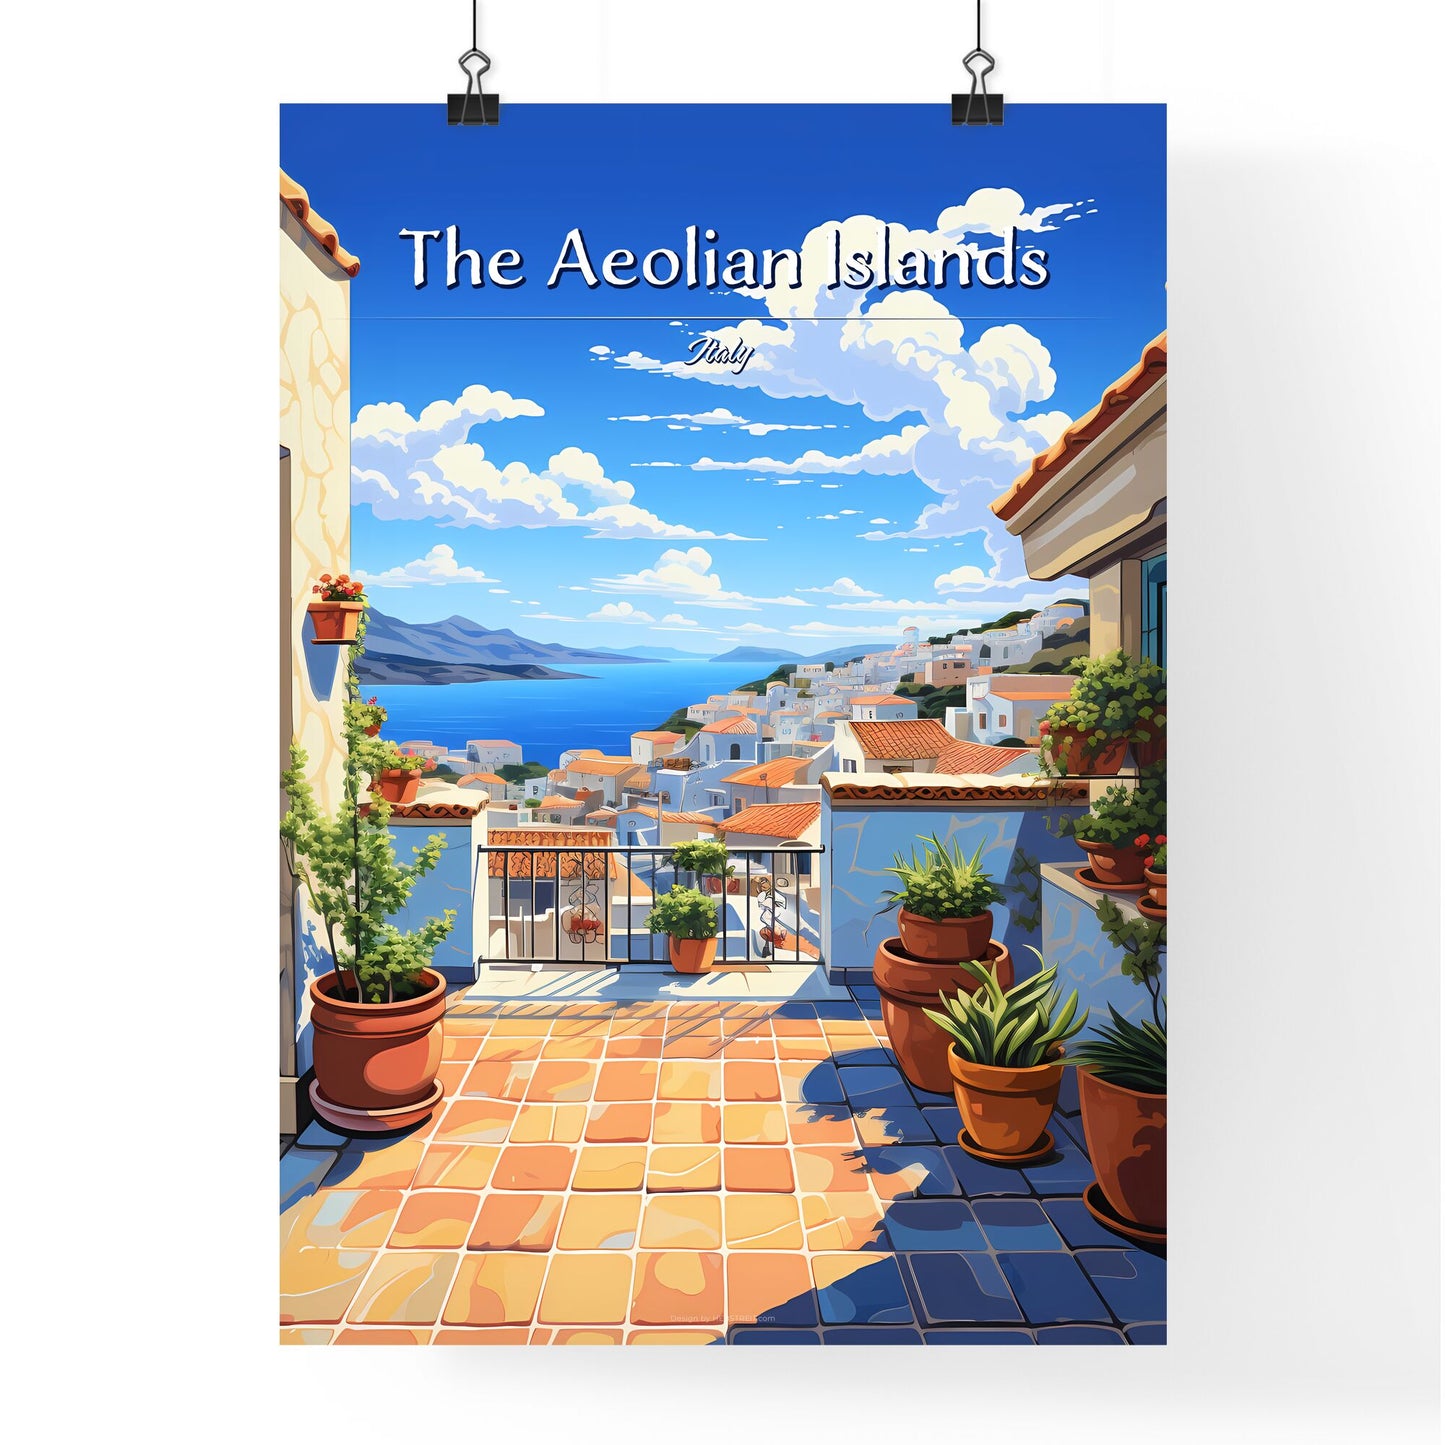 On the roofs of The Aeolian Islands, Italy - Art print of a balcony with potted plants and a view of the sea Default Title